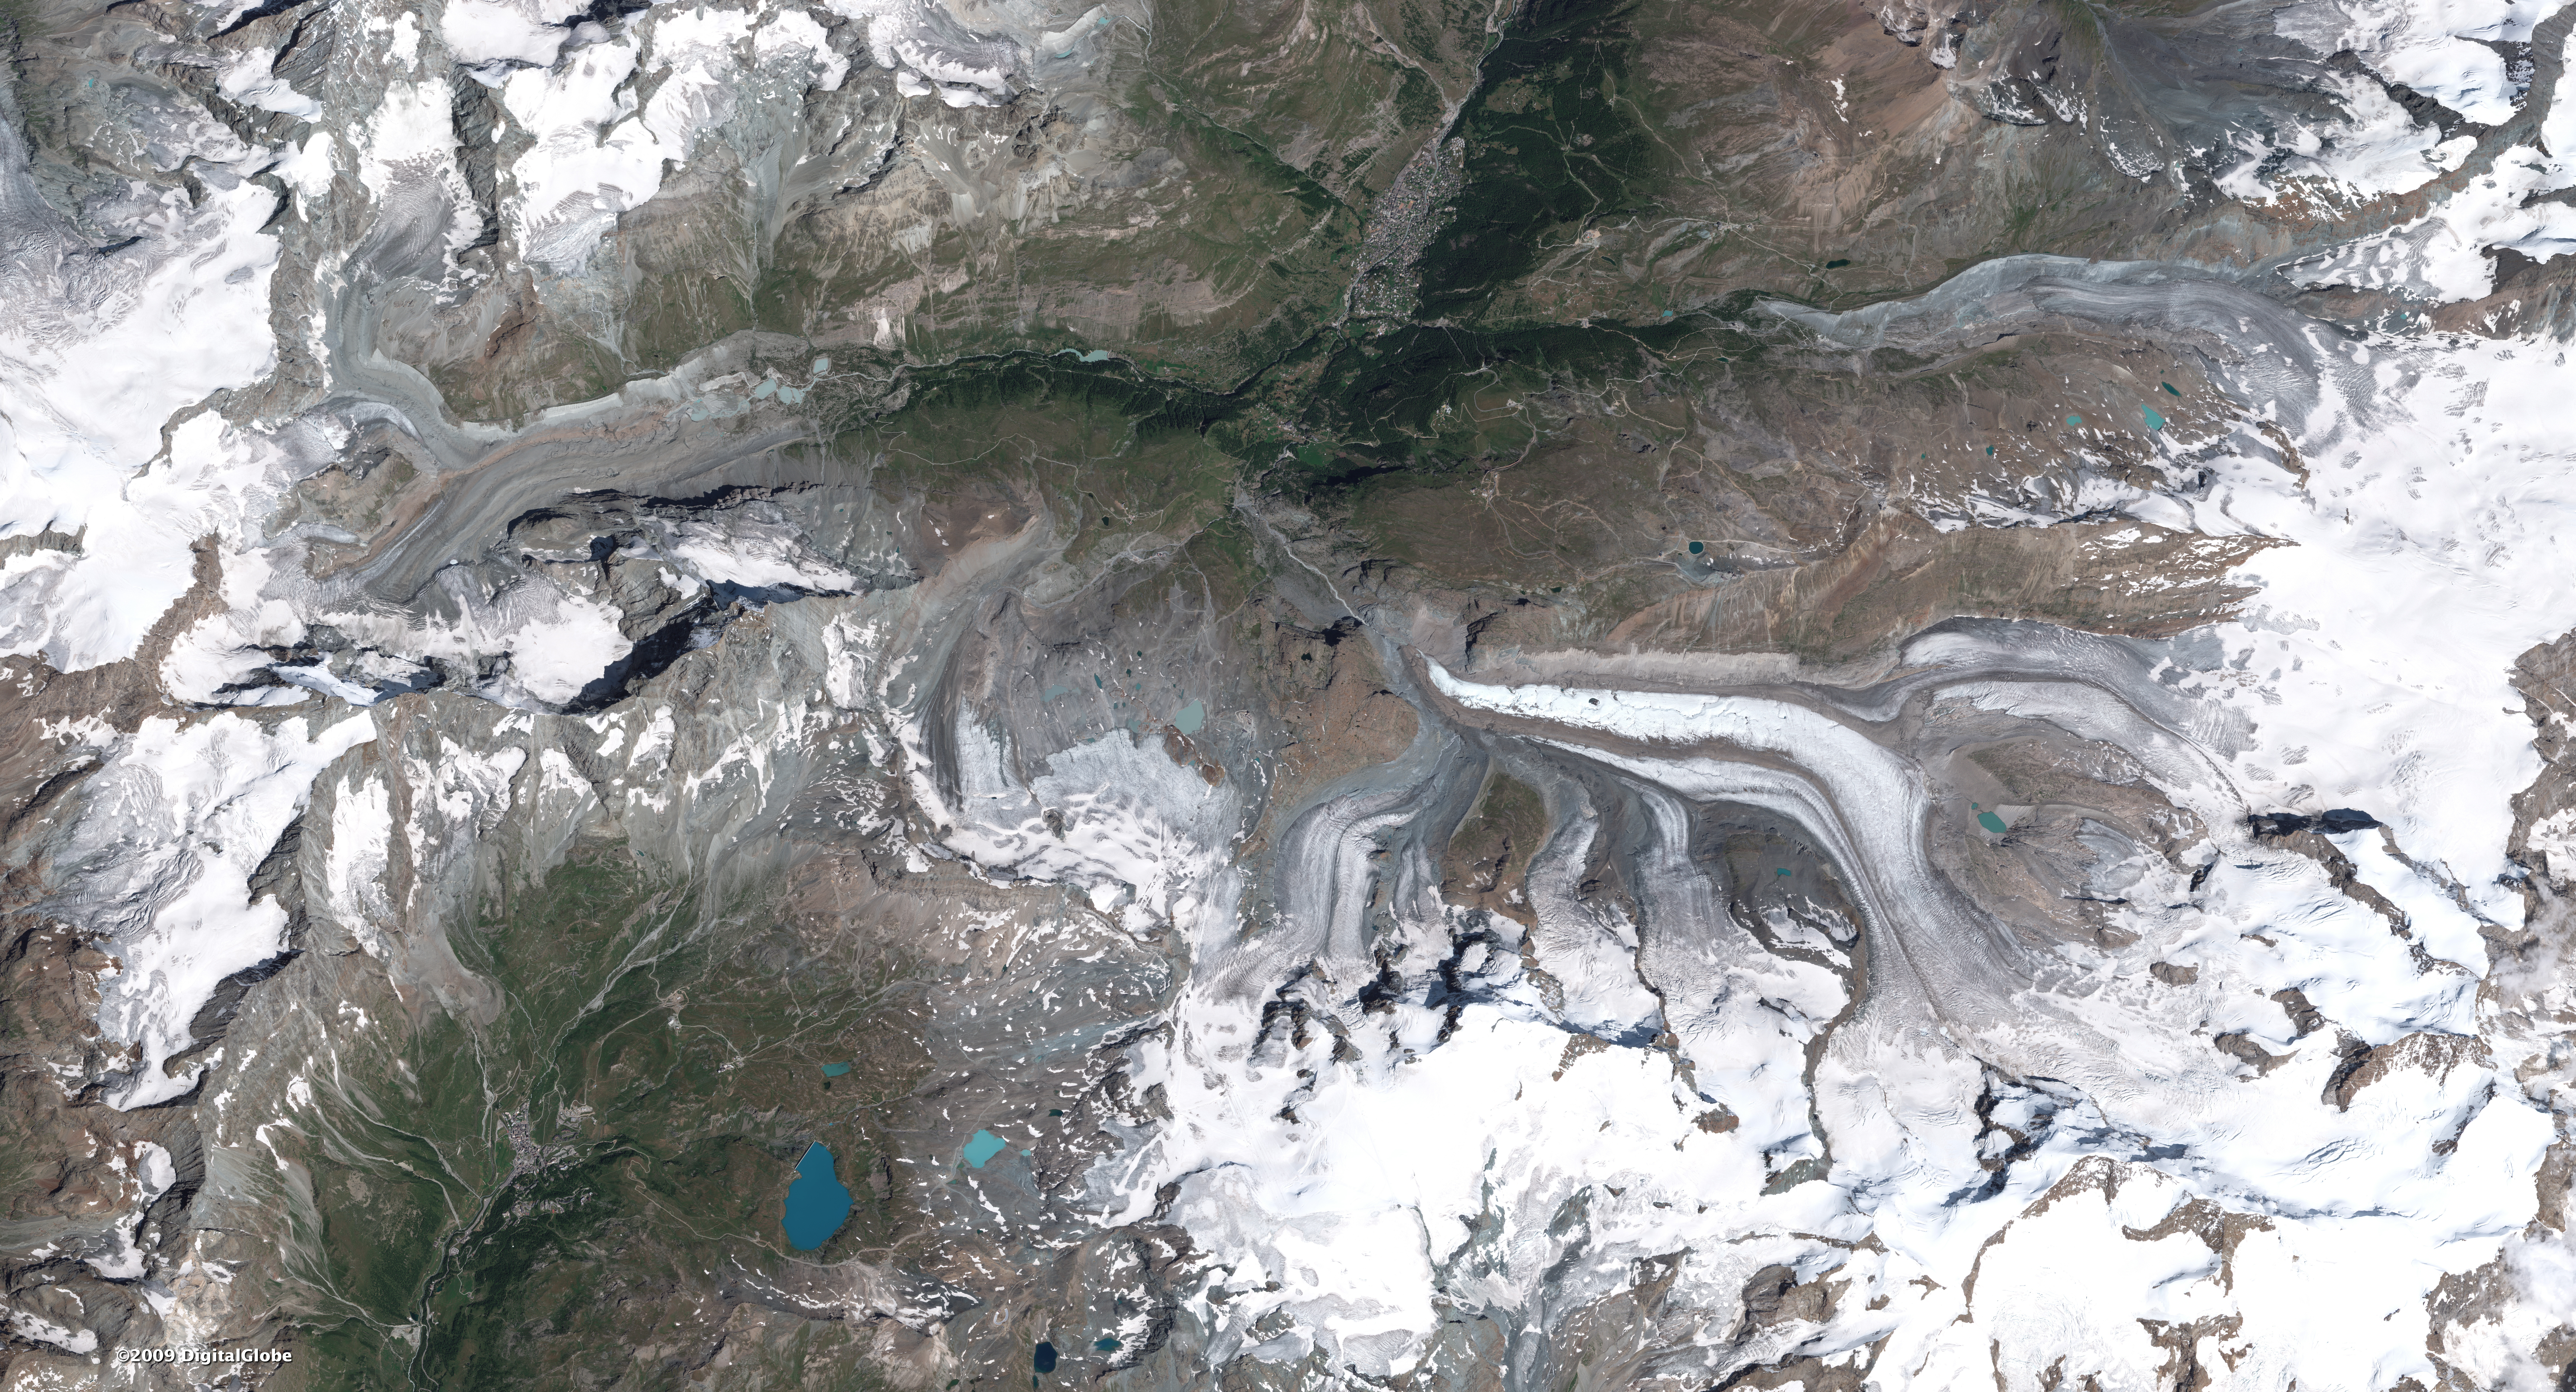 Distinct Faces of Zmutt, Findelen, and Gorner Glaciers - related image preview